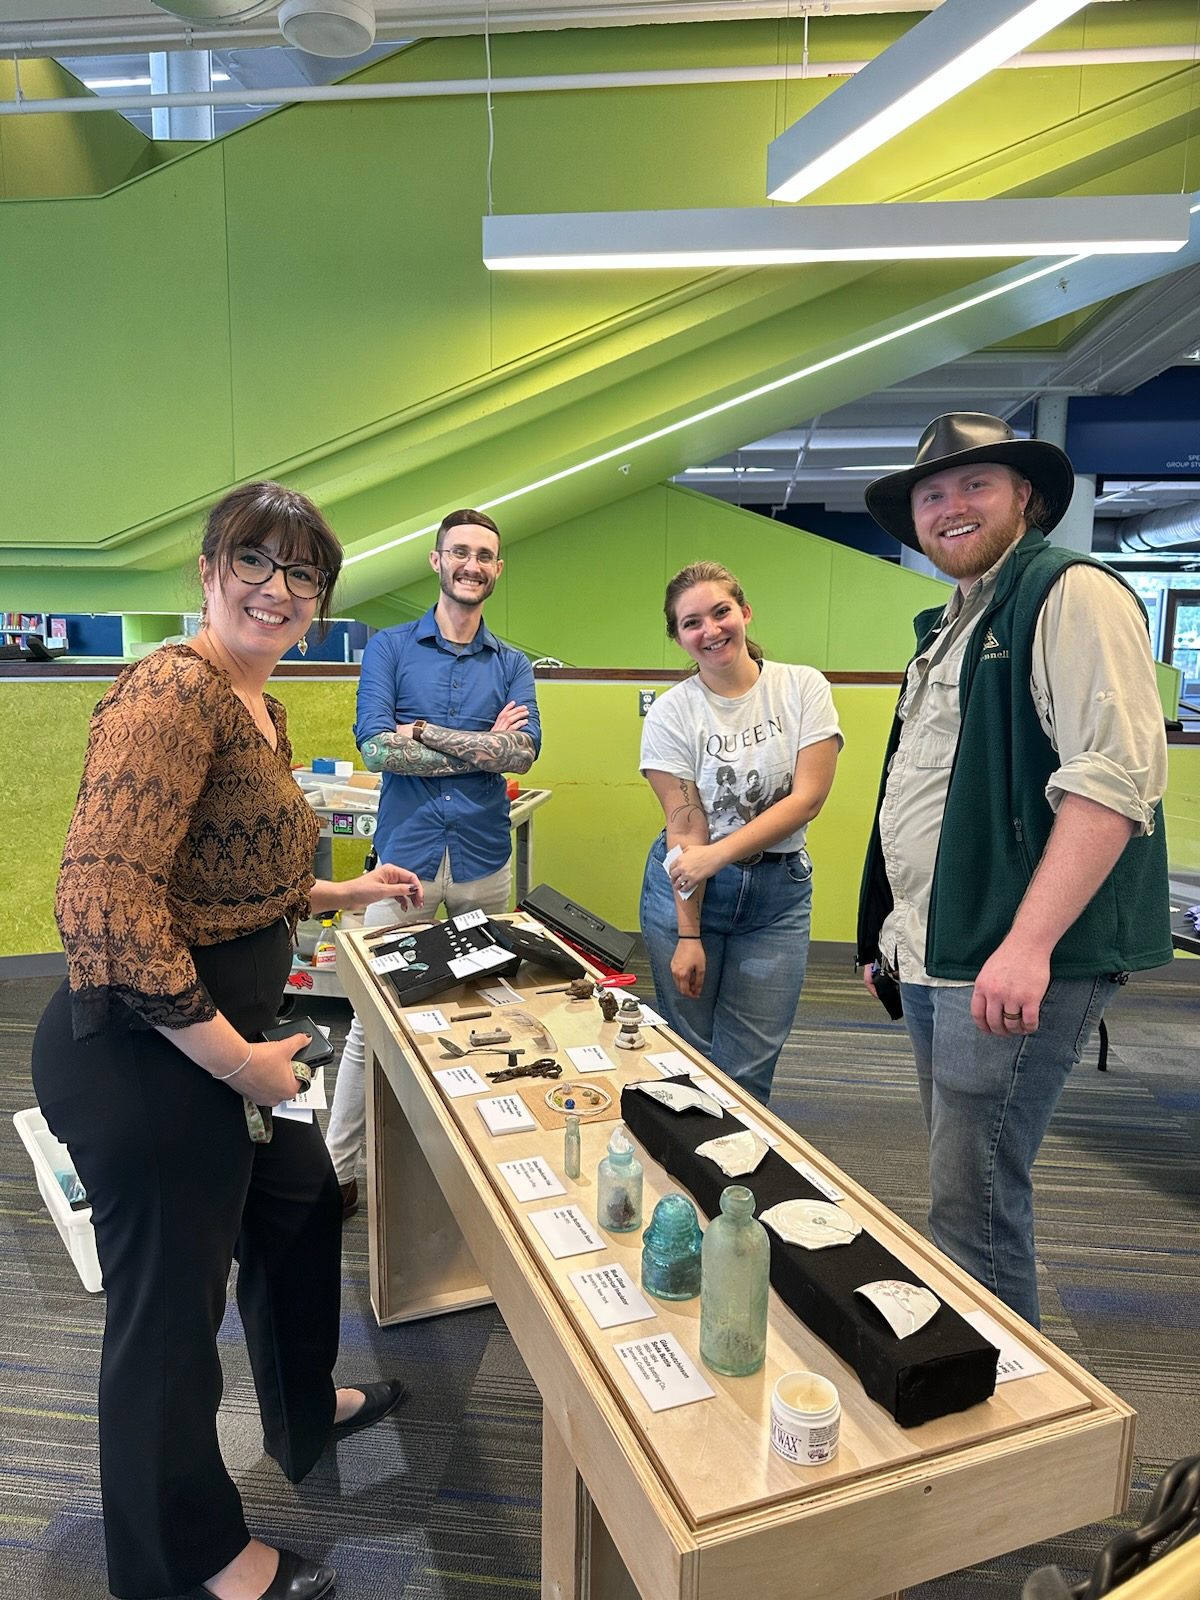 Anthropology faculty and students setting up Auraria archaeology display in the Auraria Library.